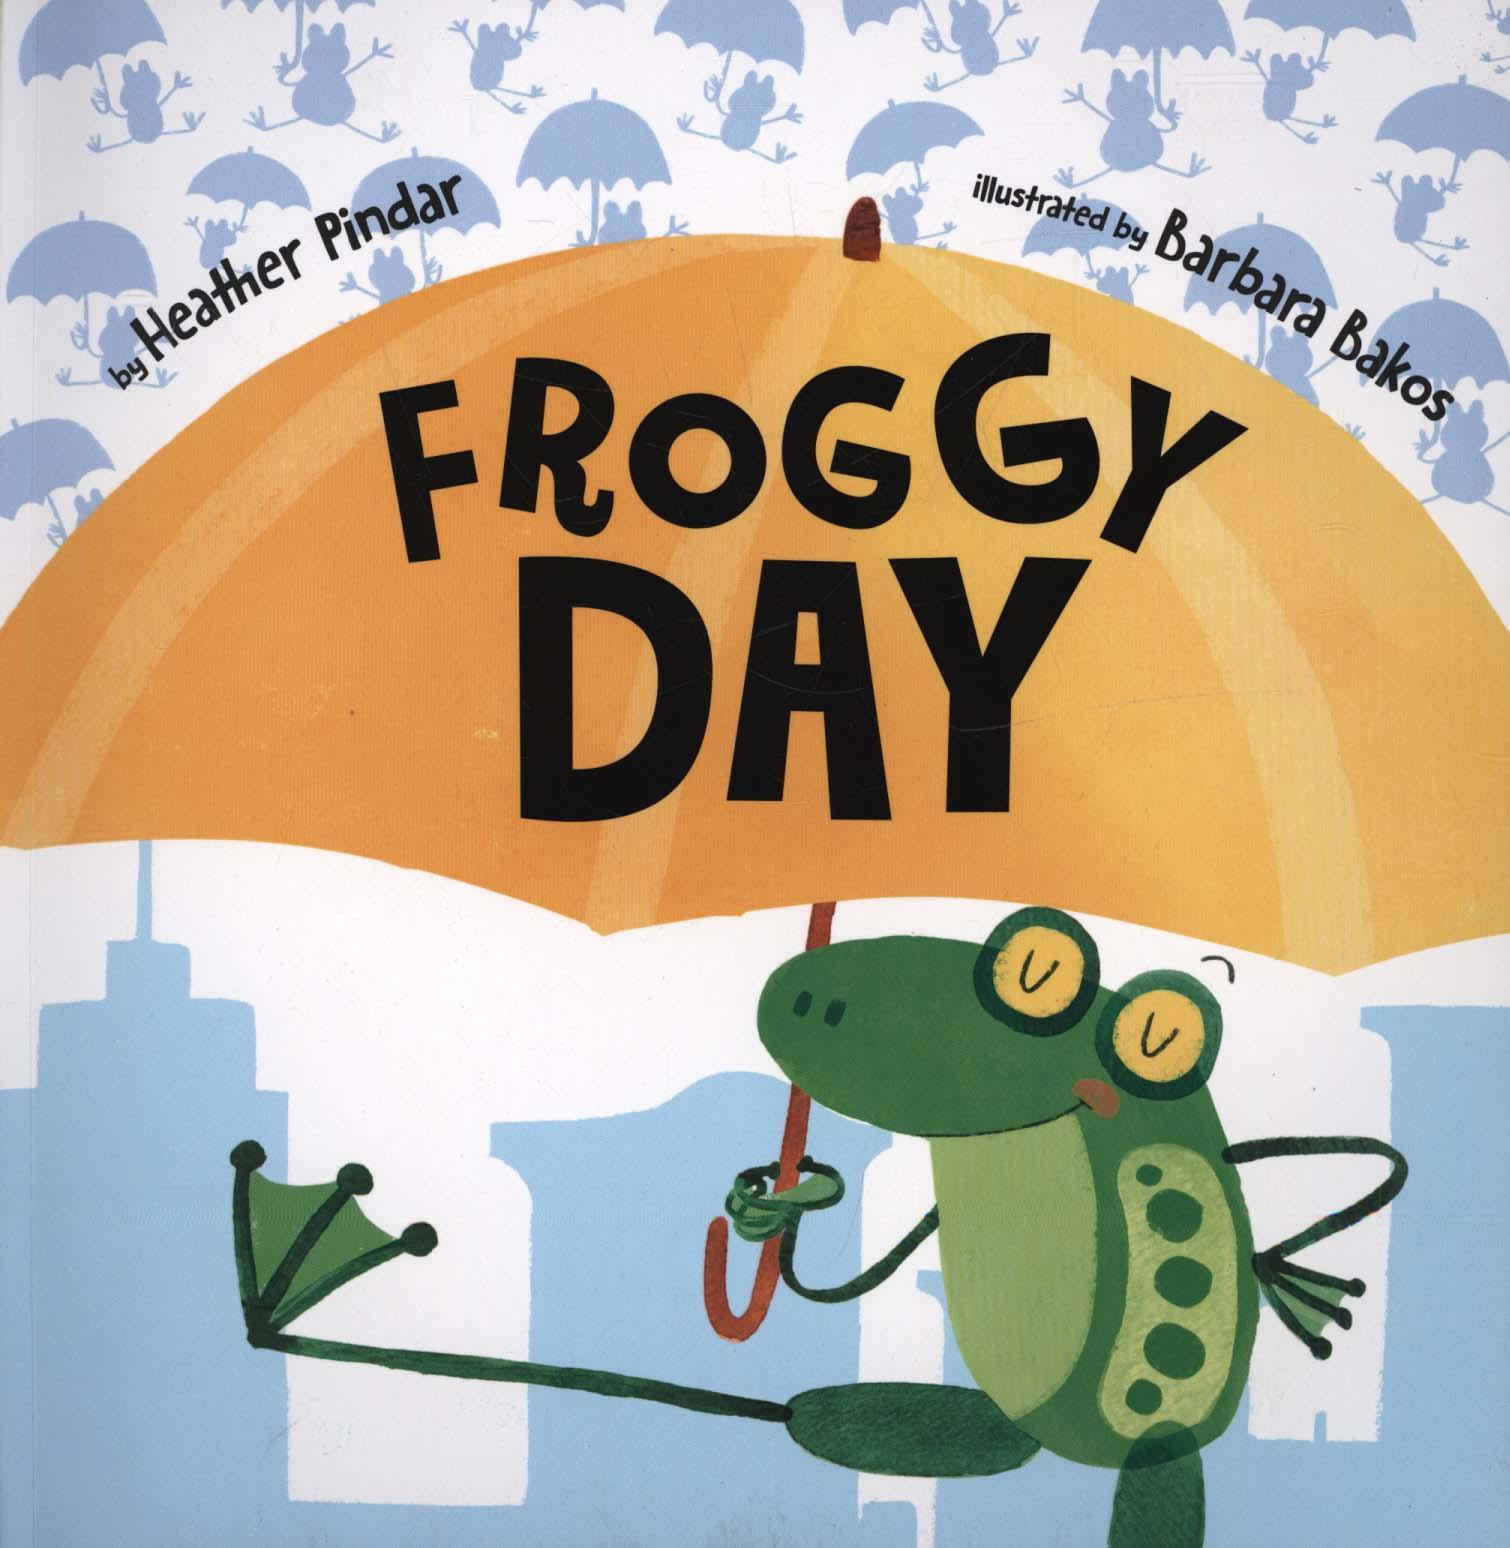 Froggy Day